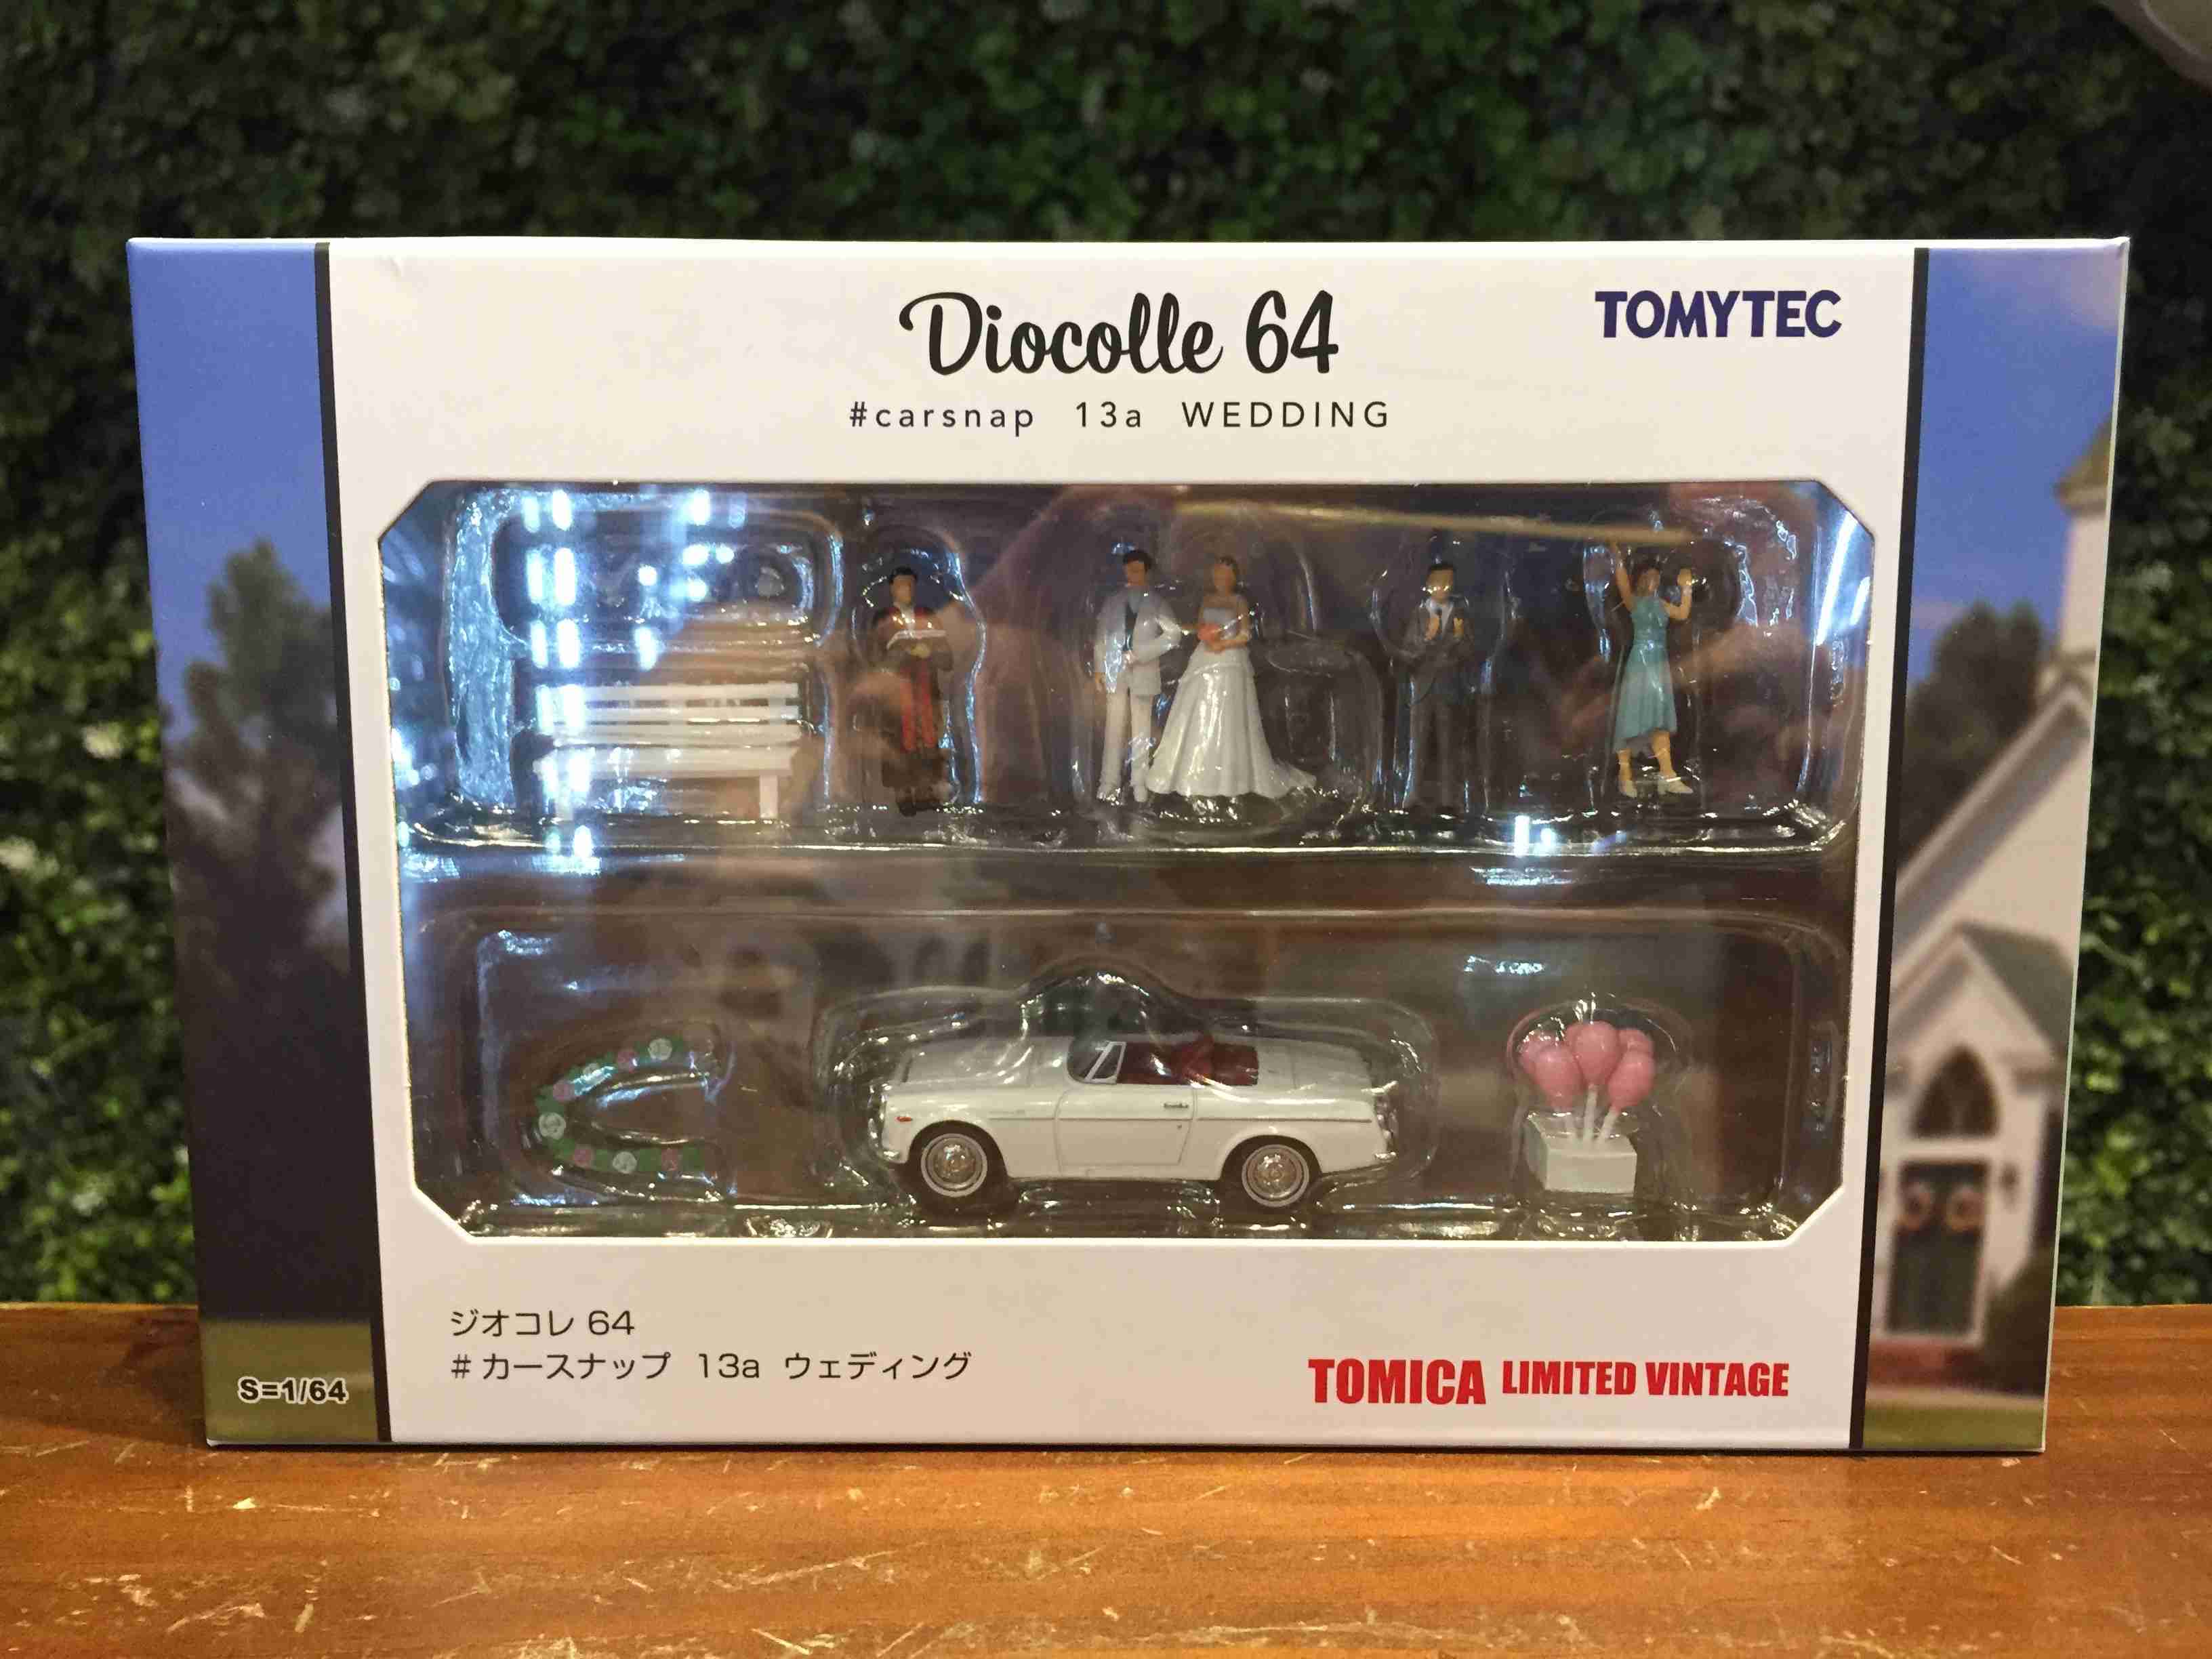 1/64 Tomica DioColle 64 Carsnap 13a Wedding【MGM】